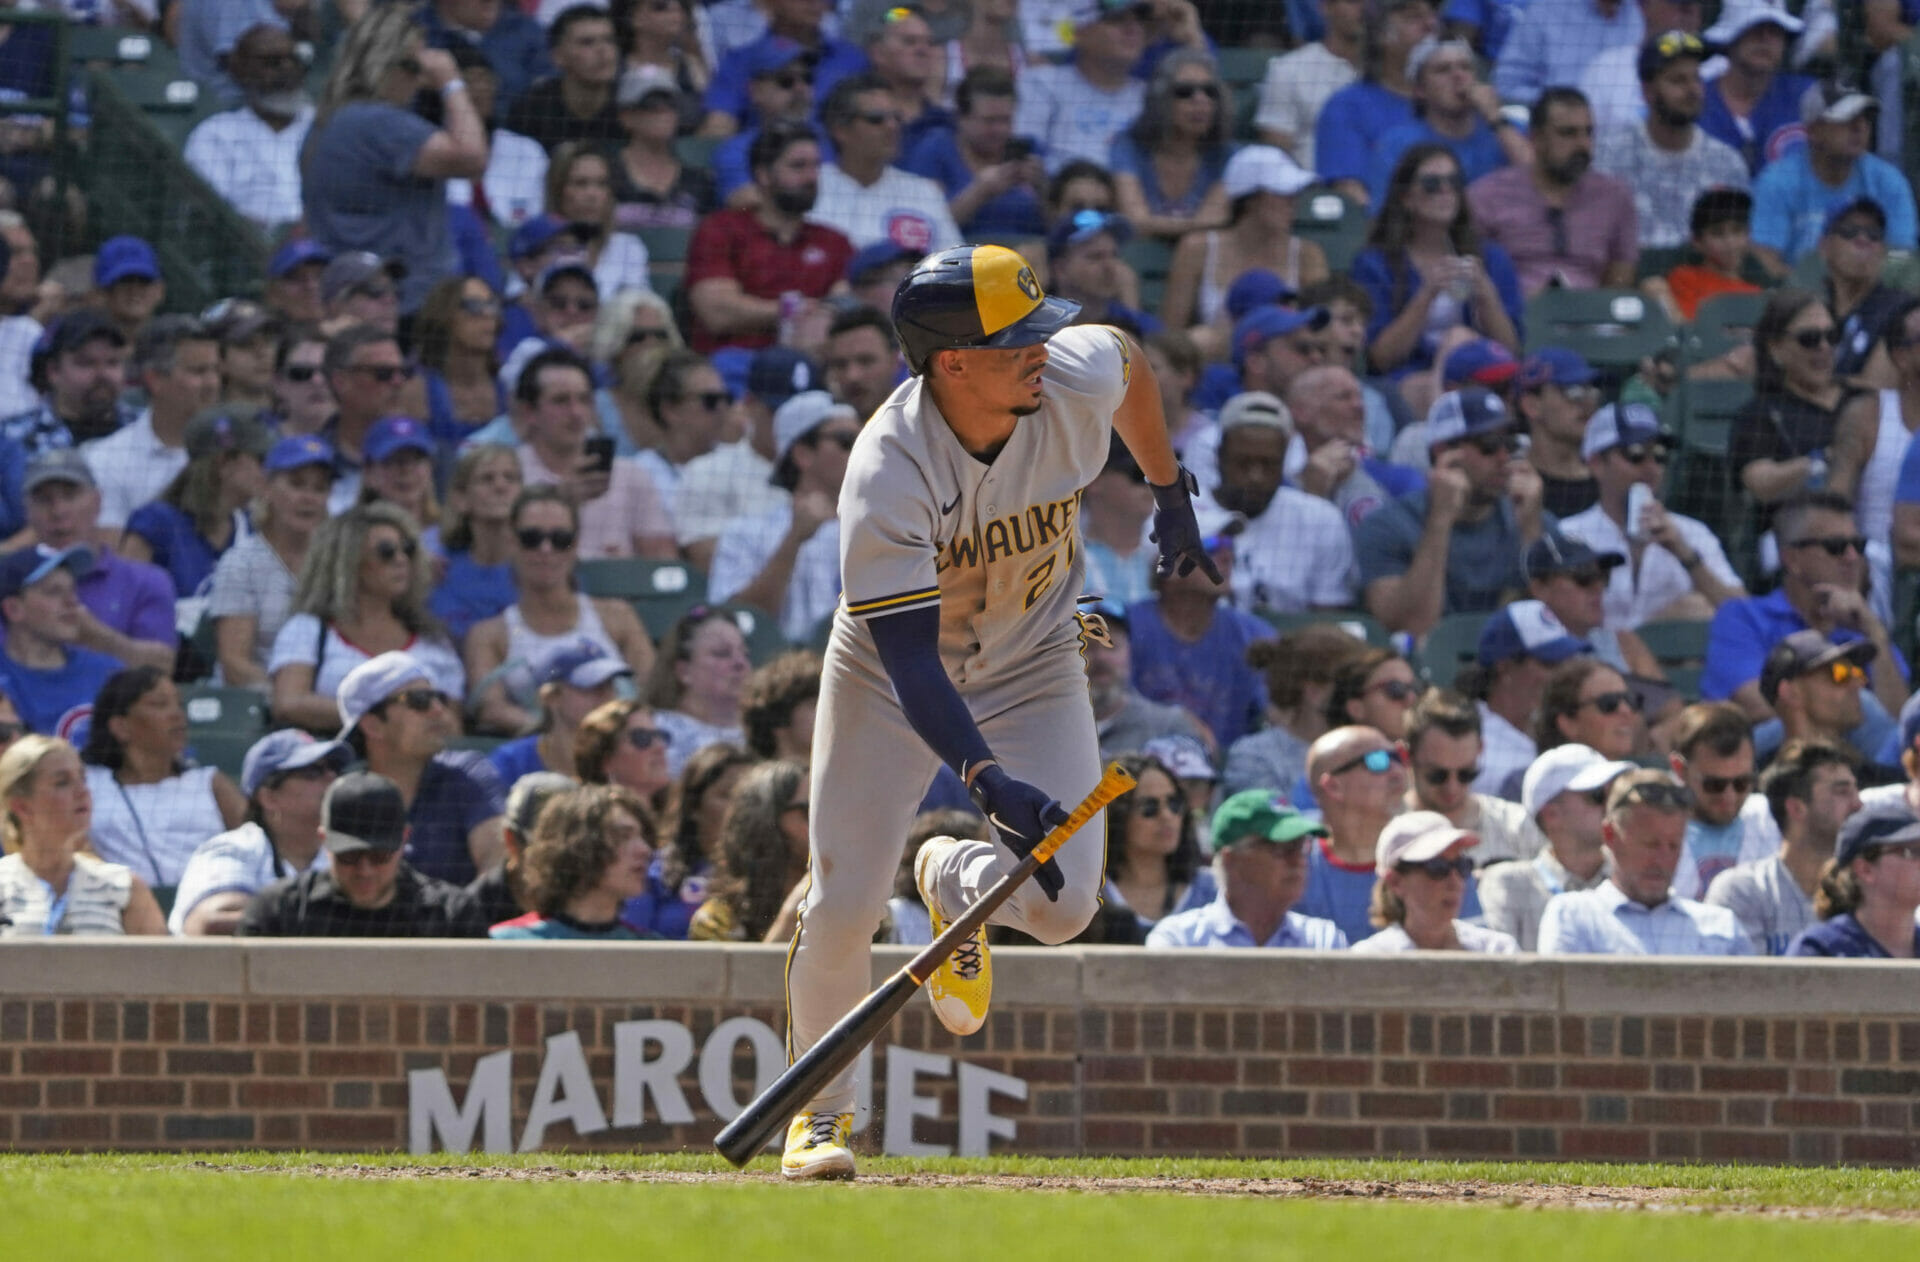 Brewers' Willy Adames makes franchise history with most single season HRs  as a shortstop